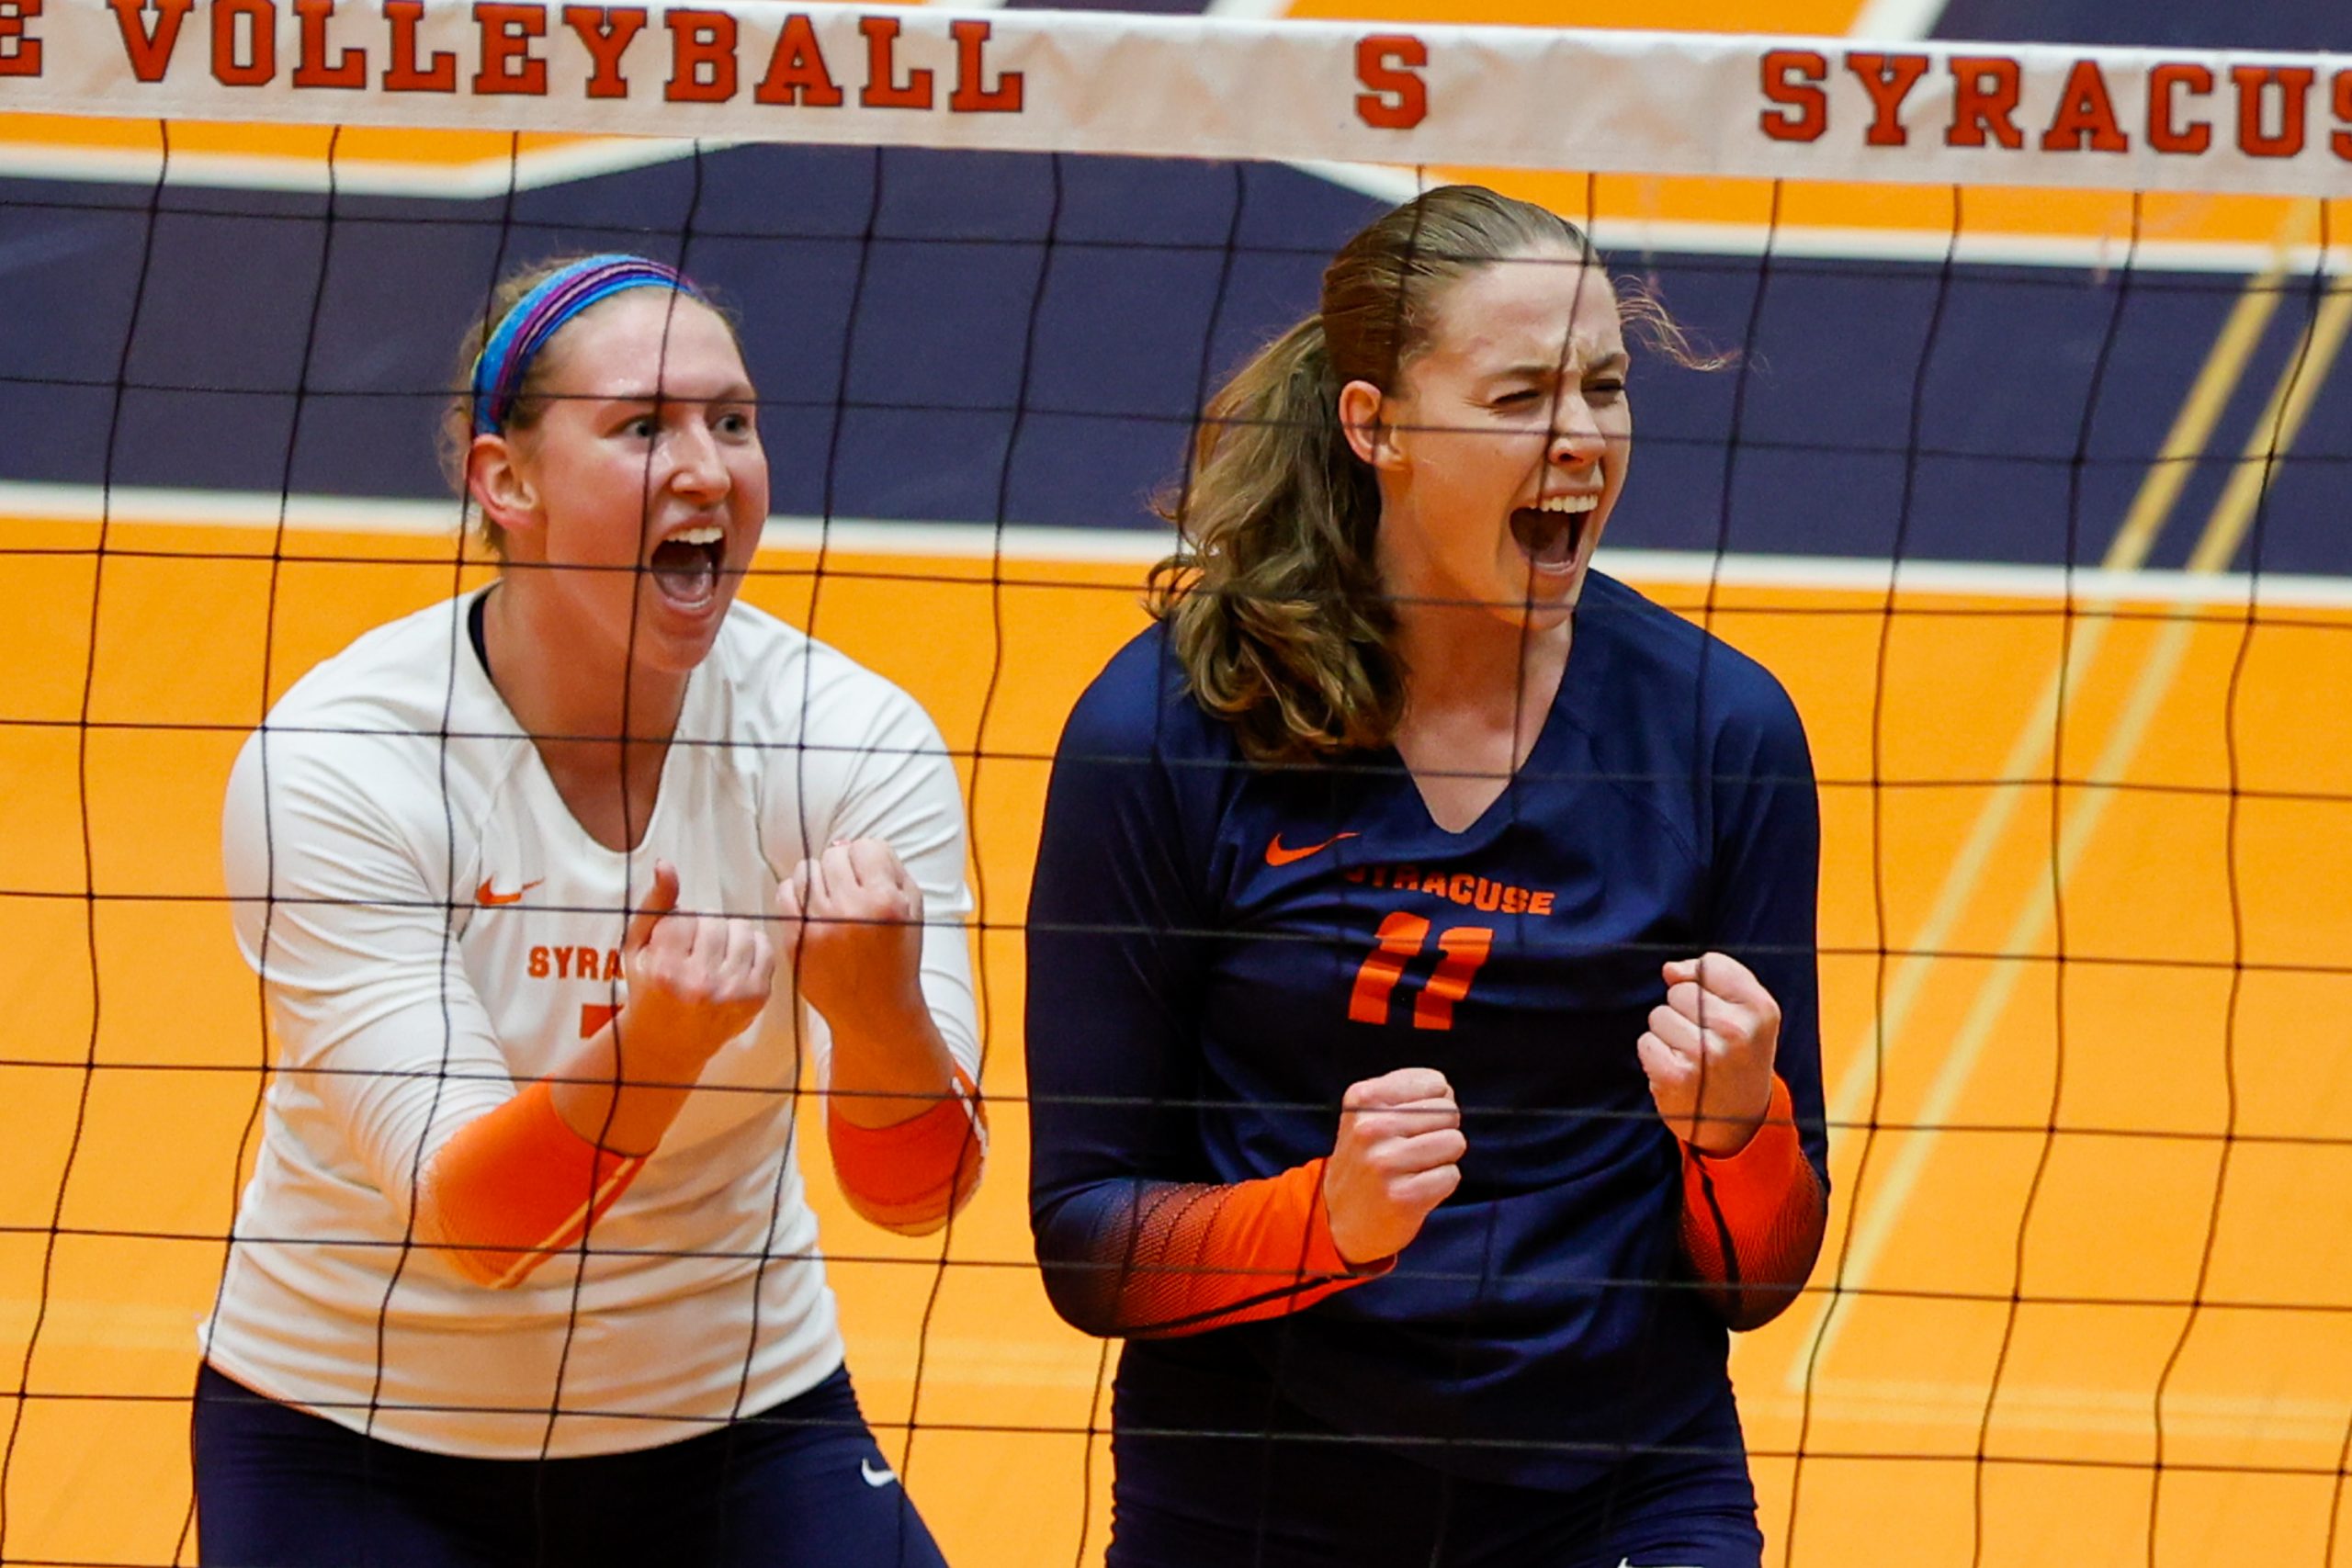 SYRACUSE, NY: Alyssa Bert #3 of Syracuse Orange and Polina Shemanova #11 of Syracuse Orange celebrate a point scored against the Yale Bulldogs during a women’s volleyball match at the Women’s Building at Syracuse University on September 9, 2022.